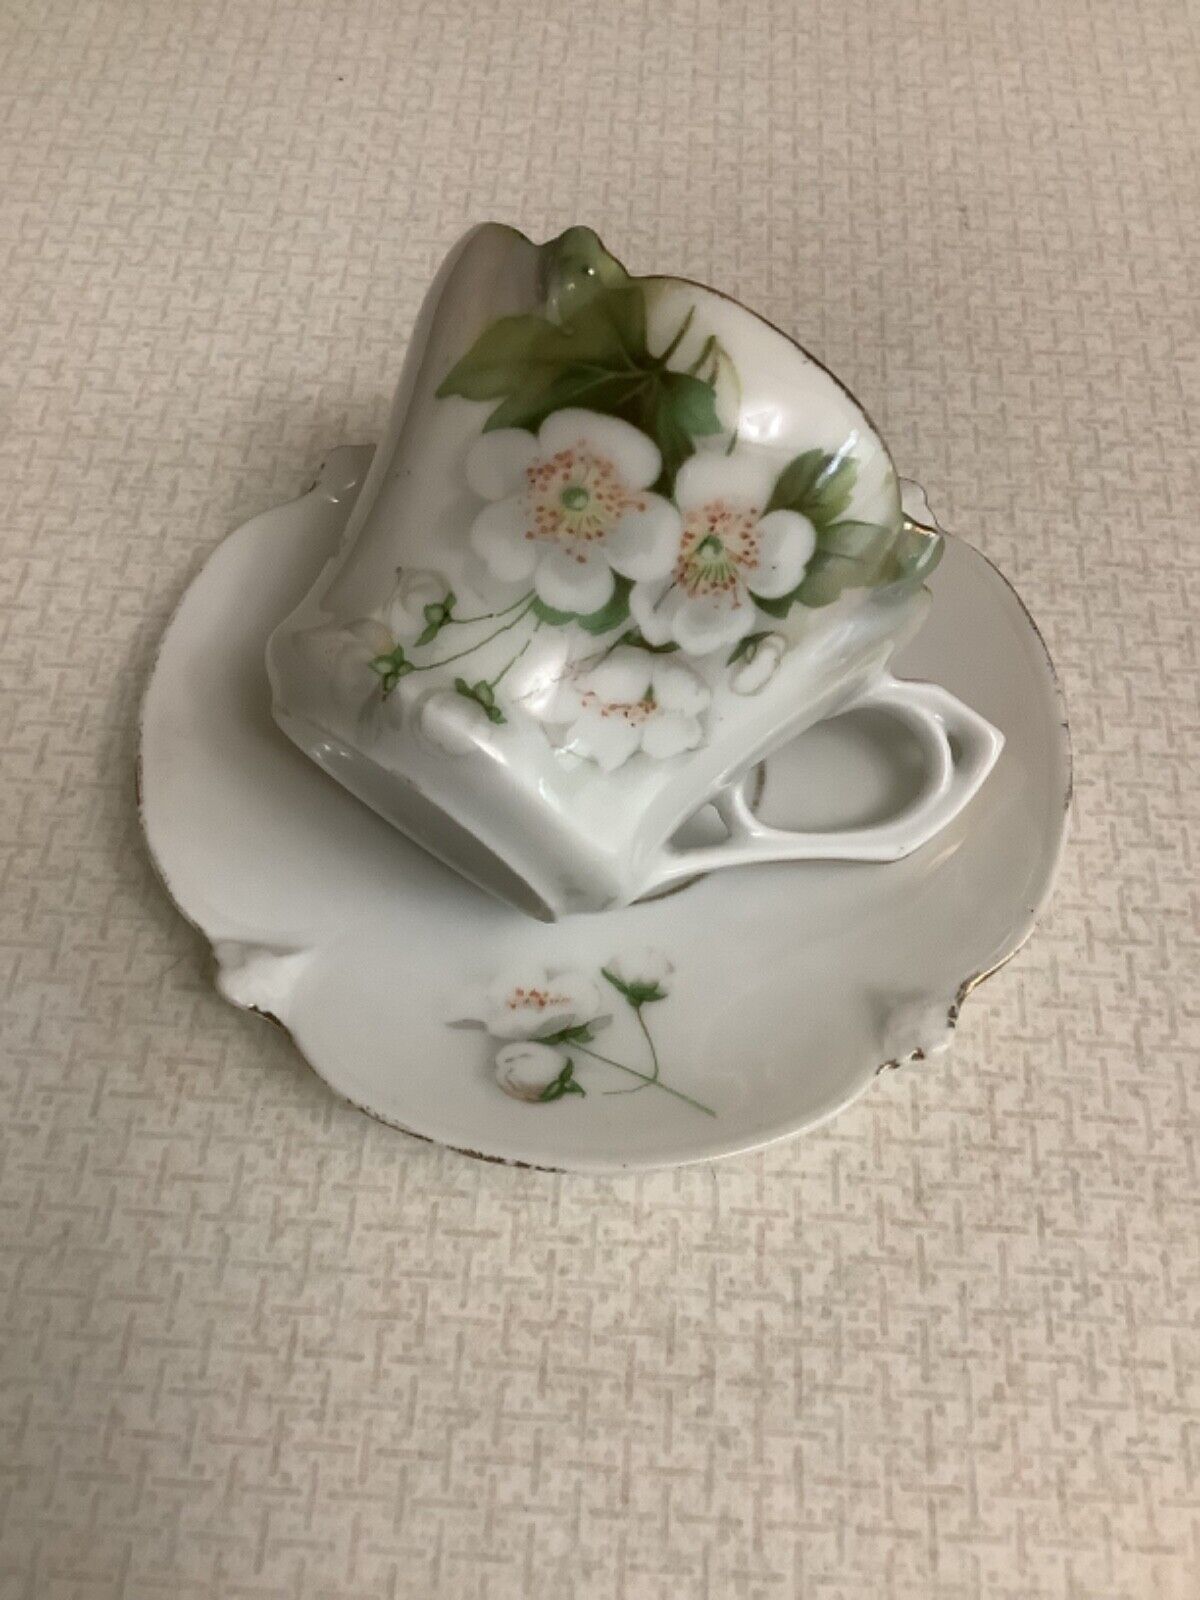 Beautiful Antique RS Germany Demitasse floral Cup & saucer set